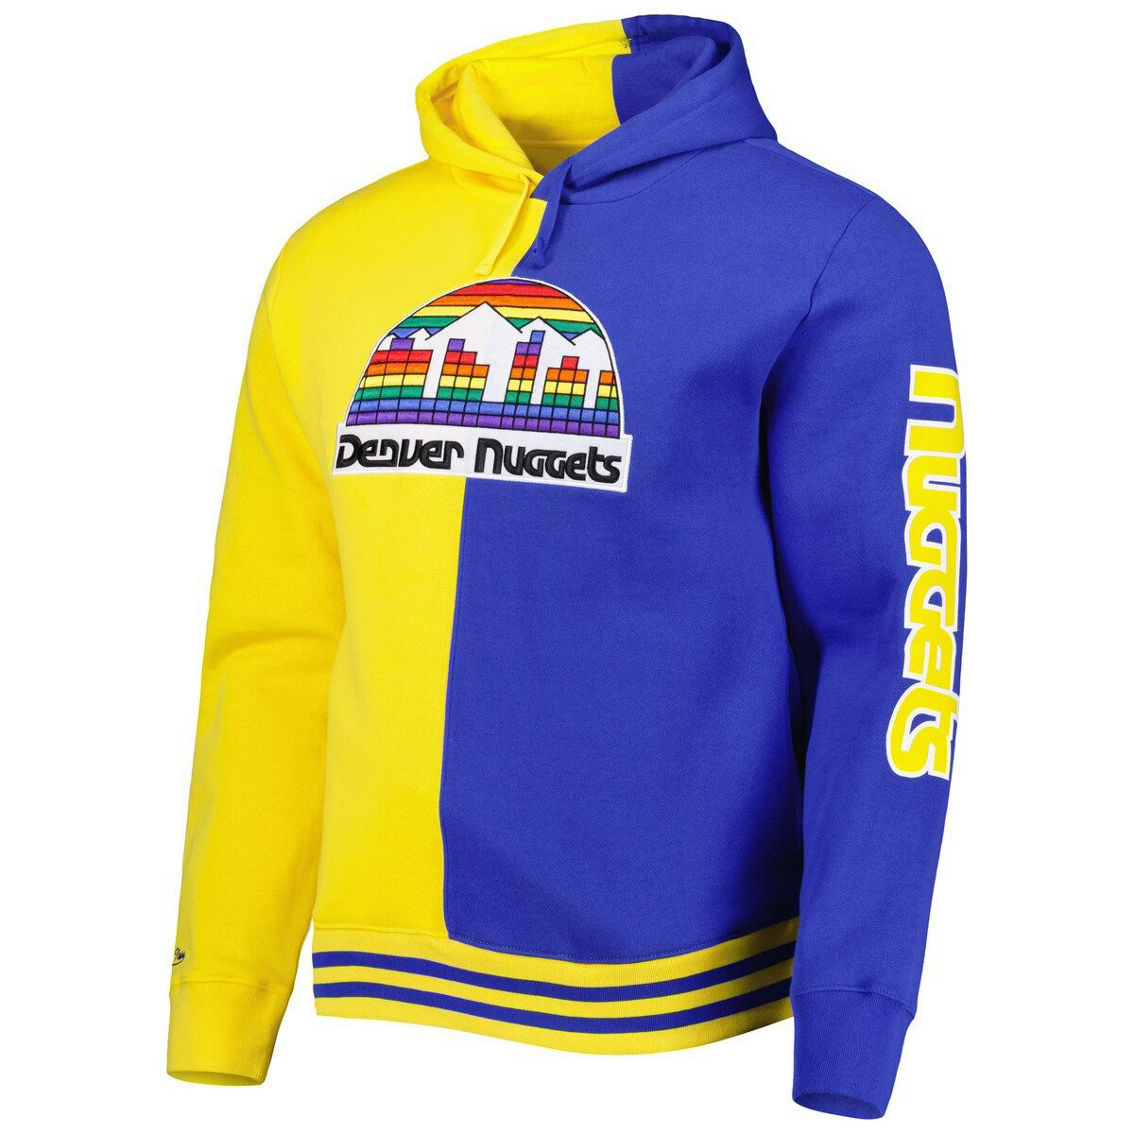 Mitchell & Ness Men's Gold/Royal Denver Nuggets Hardwood Classics Split Pullover Hoodie - Image 3 of 4